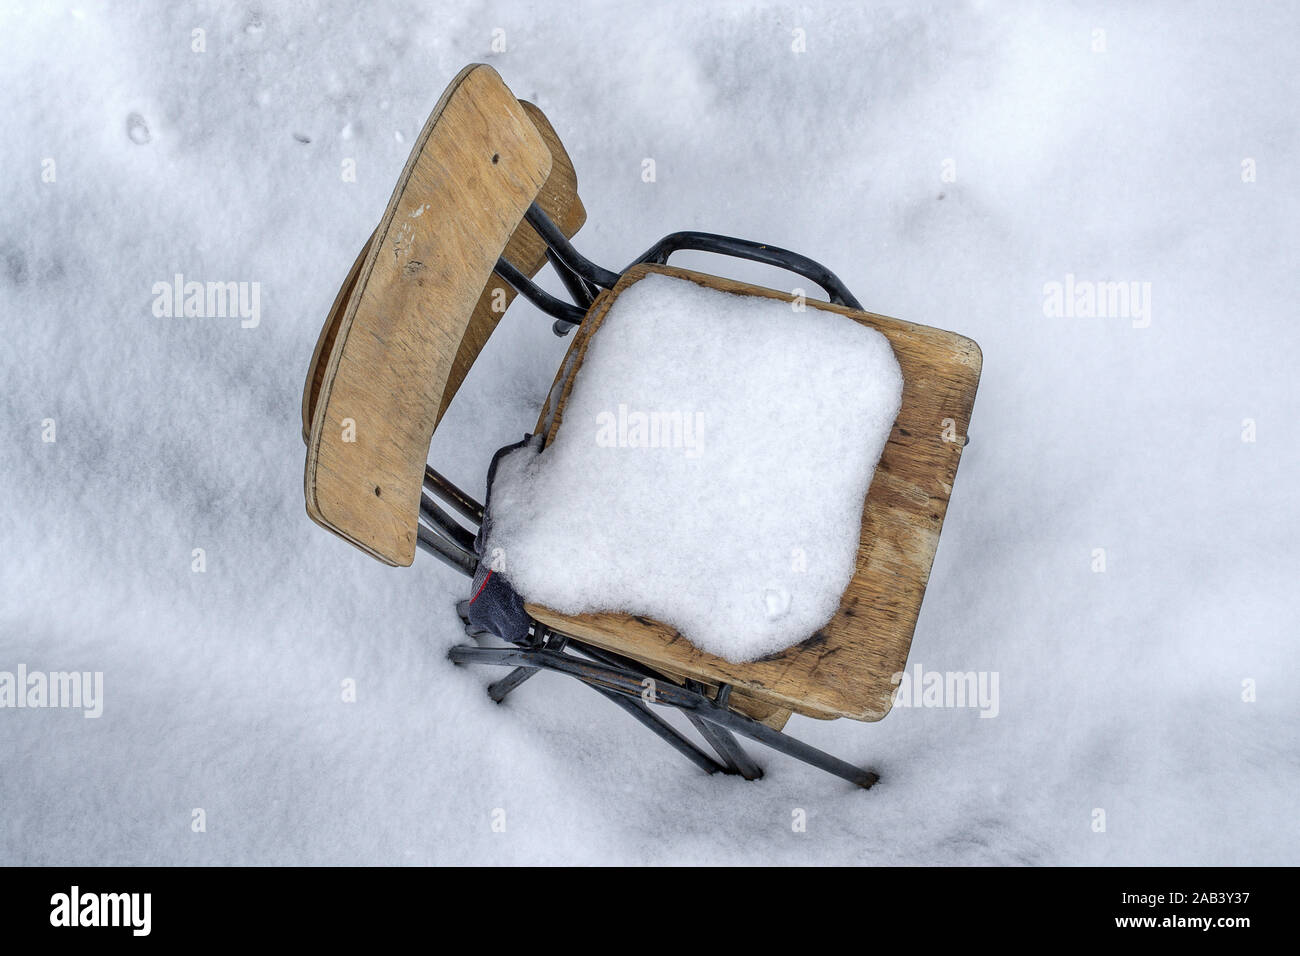 Gestapelte Stühle im Schnee |Stacked chairs in the snow| Stock Photo